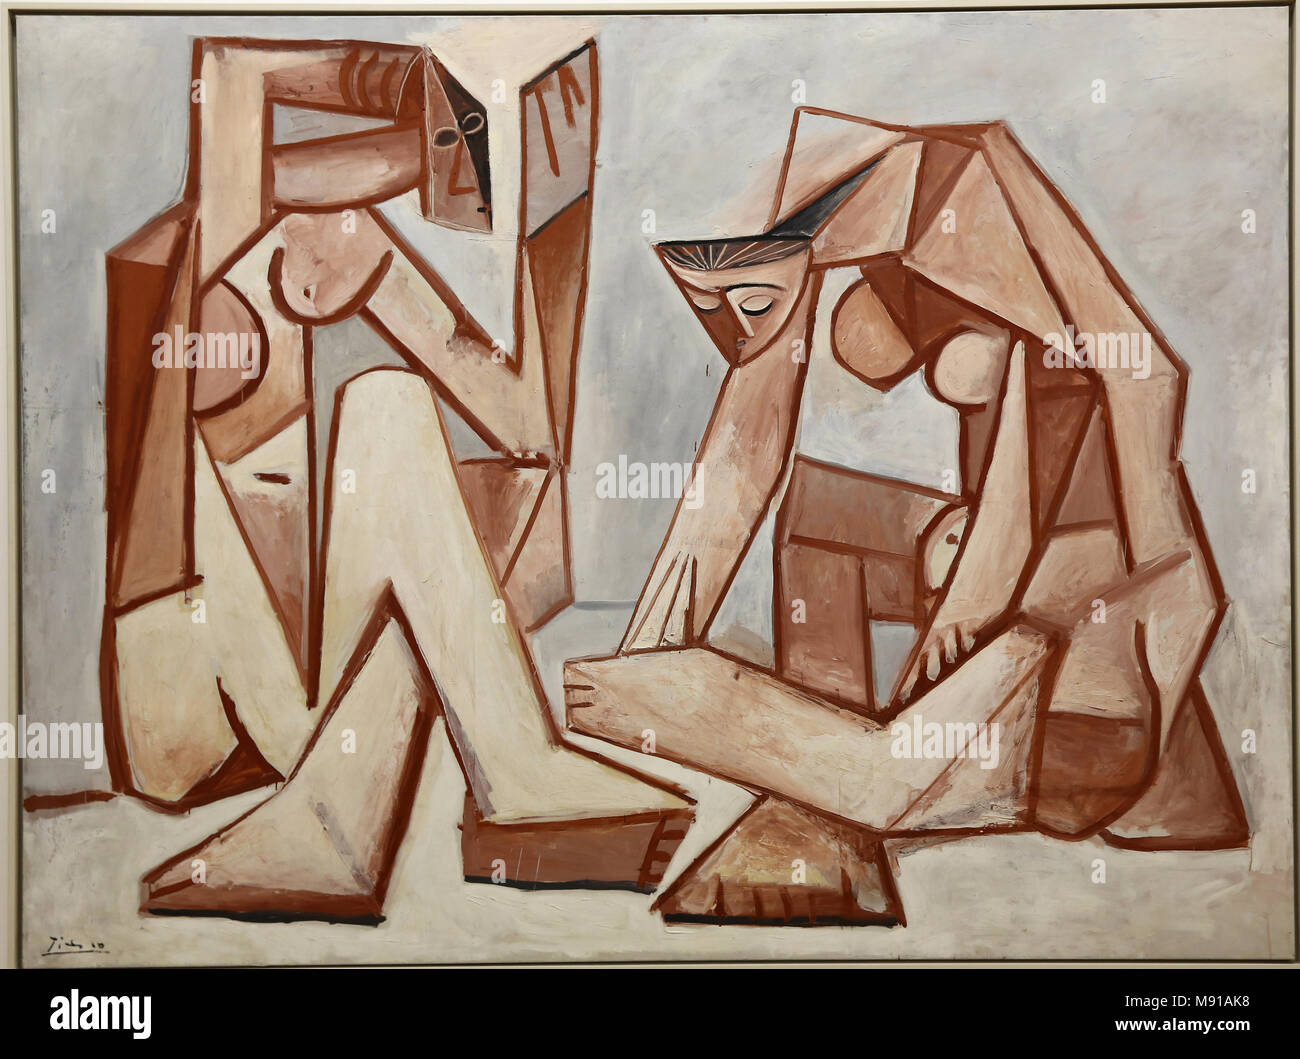 Musee National d'Art Moderne (National Modern art Museum), Georges Pompidou centre, Paris, France. Pablo Picasso, Women at the sea, february 16,1956, Stock Photo